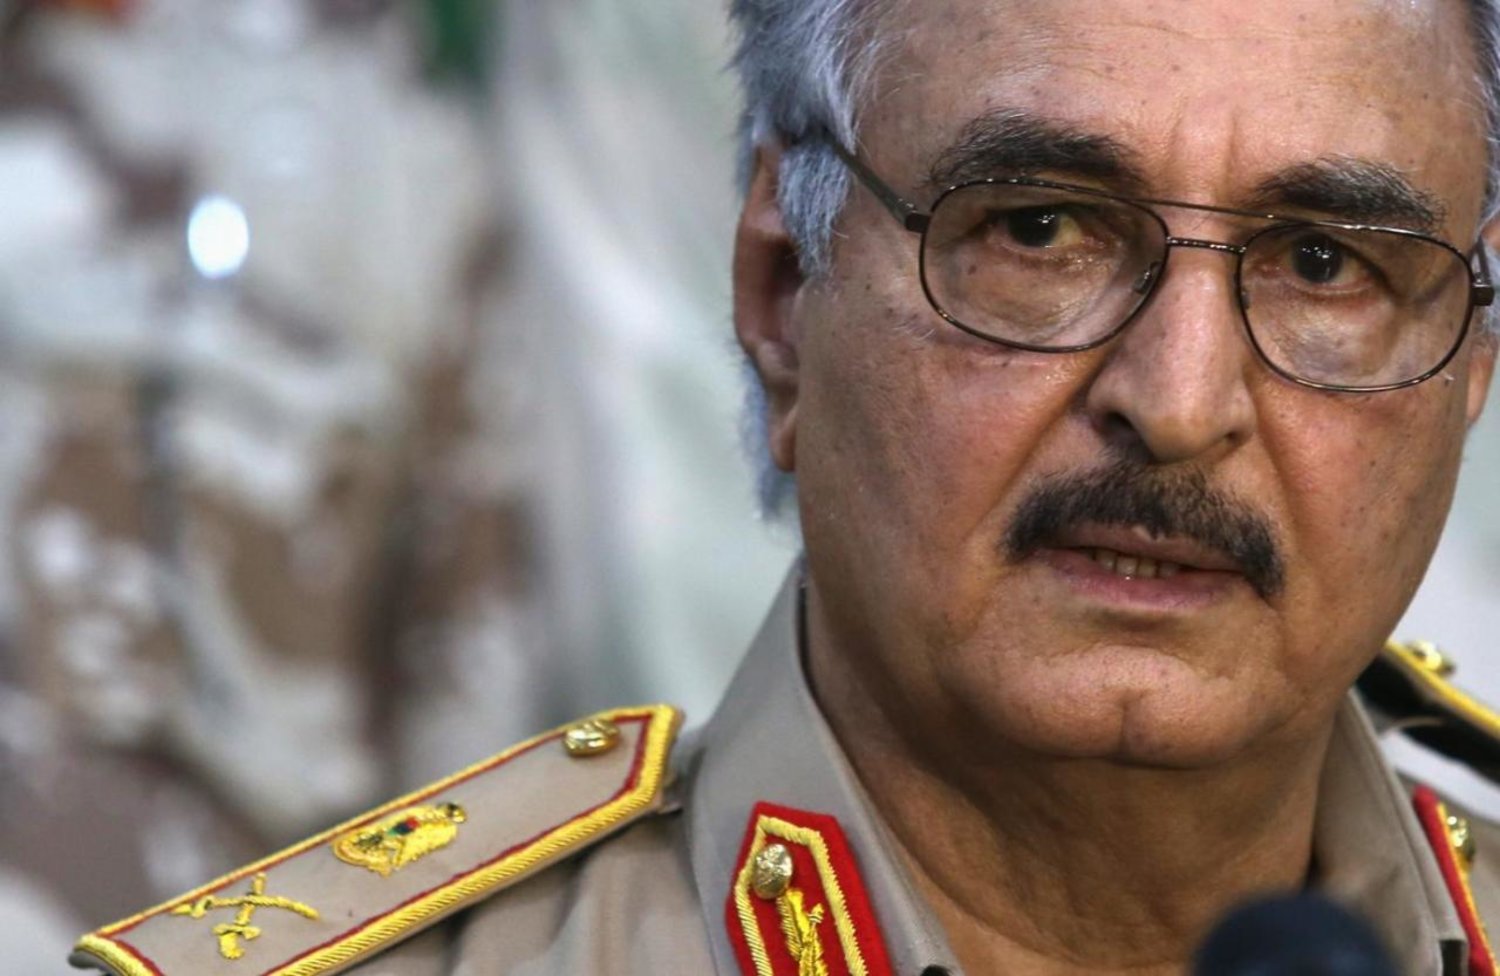 Then-General Khalifa Haftar speaks during a news conference at a sports club in Abyar, east of Benghazi May 21, 2014. REUTERS/Esam Omran Al-Fetori